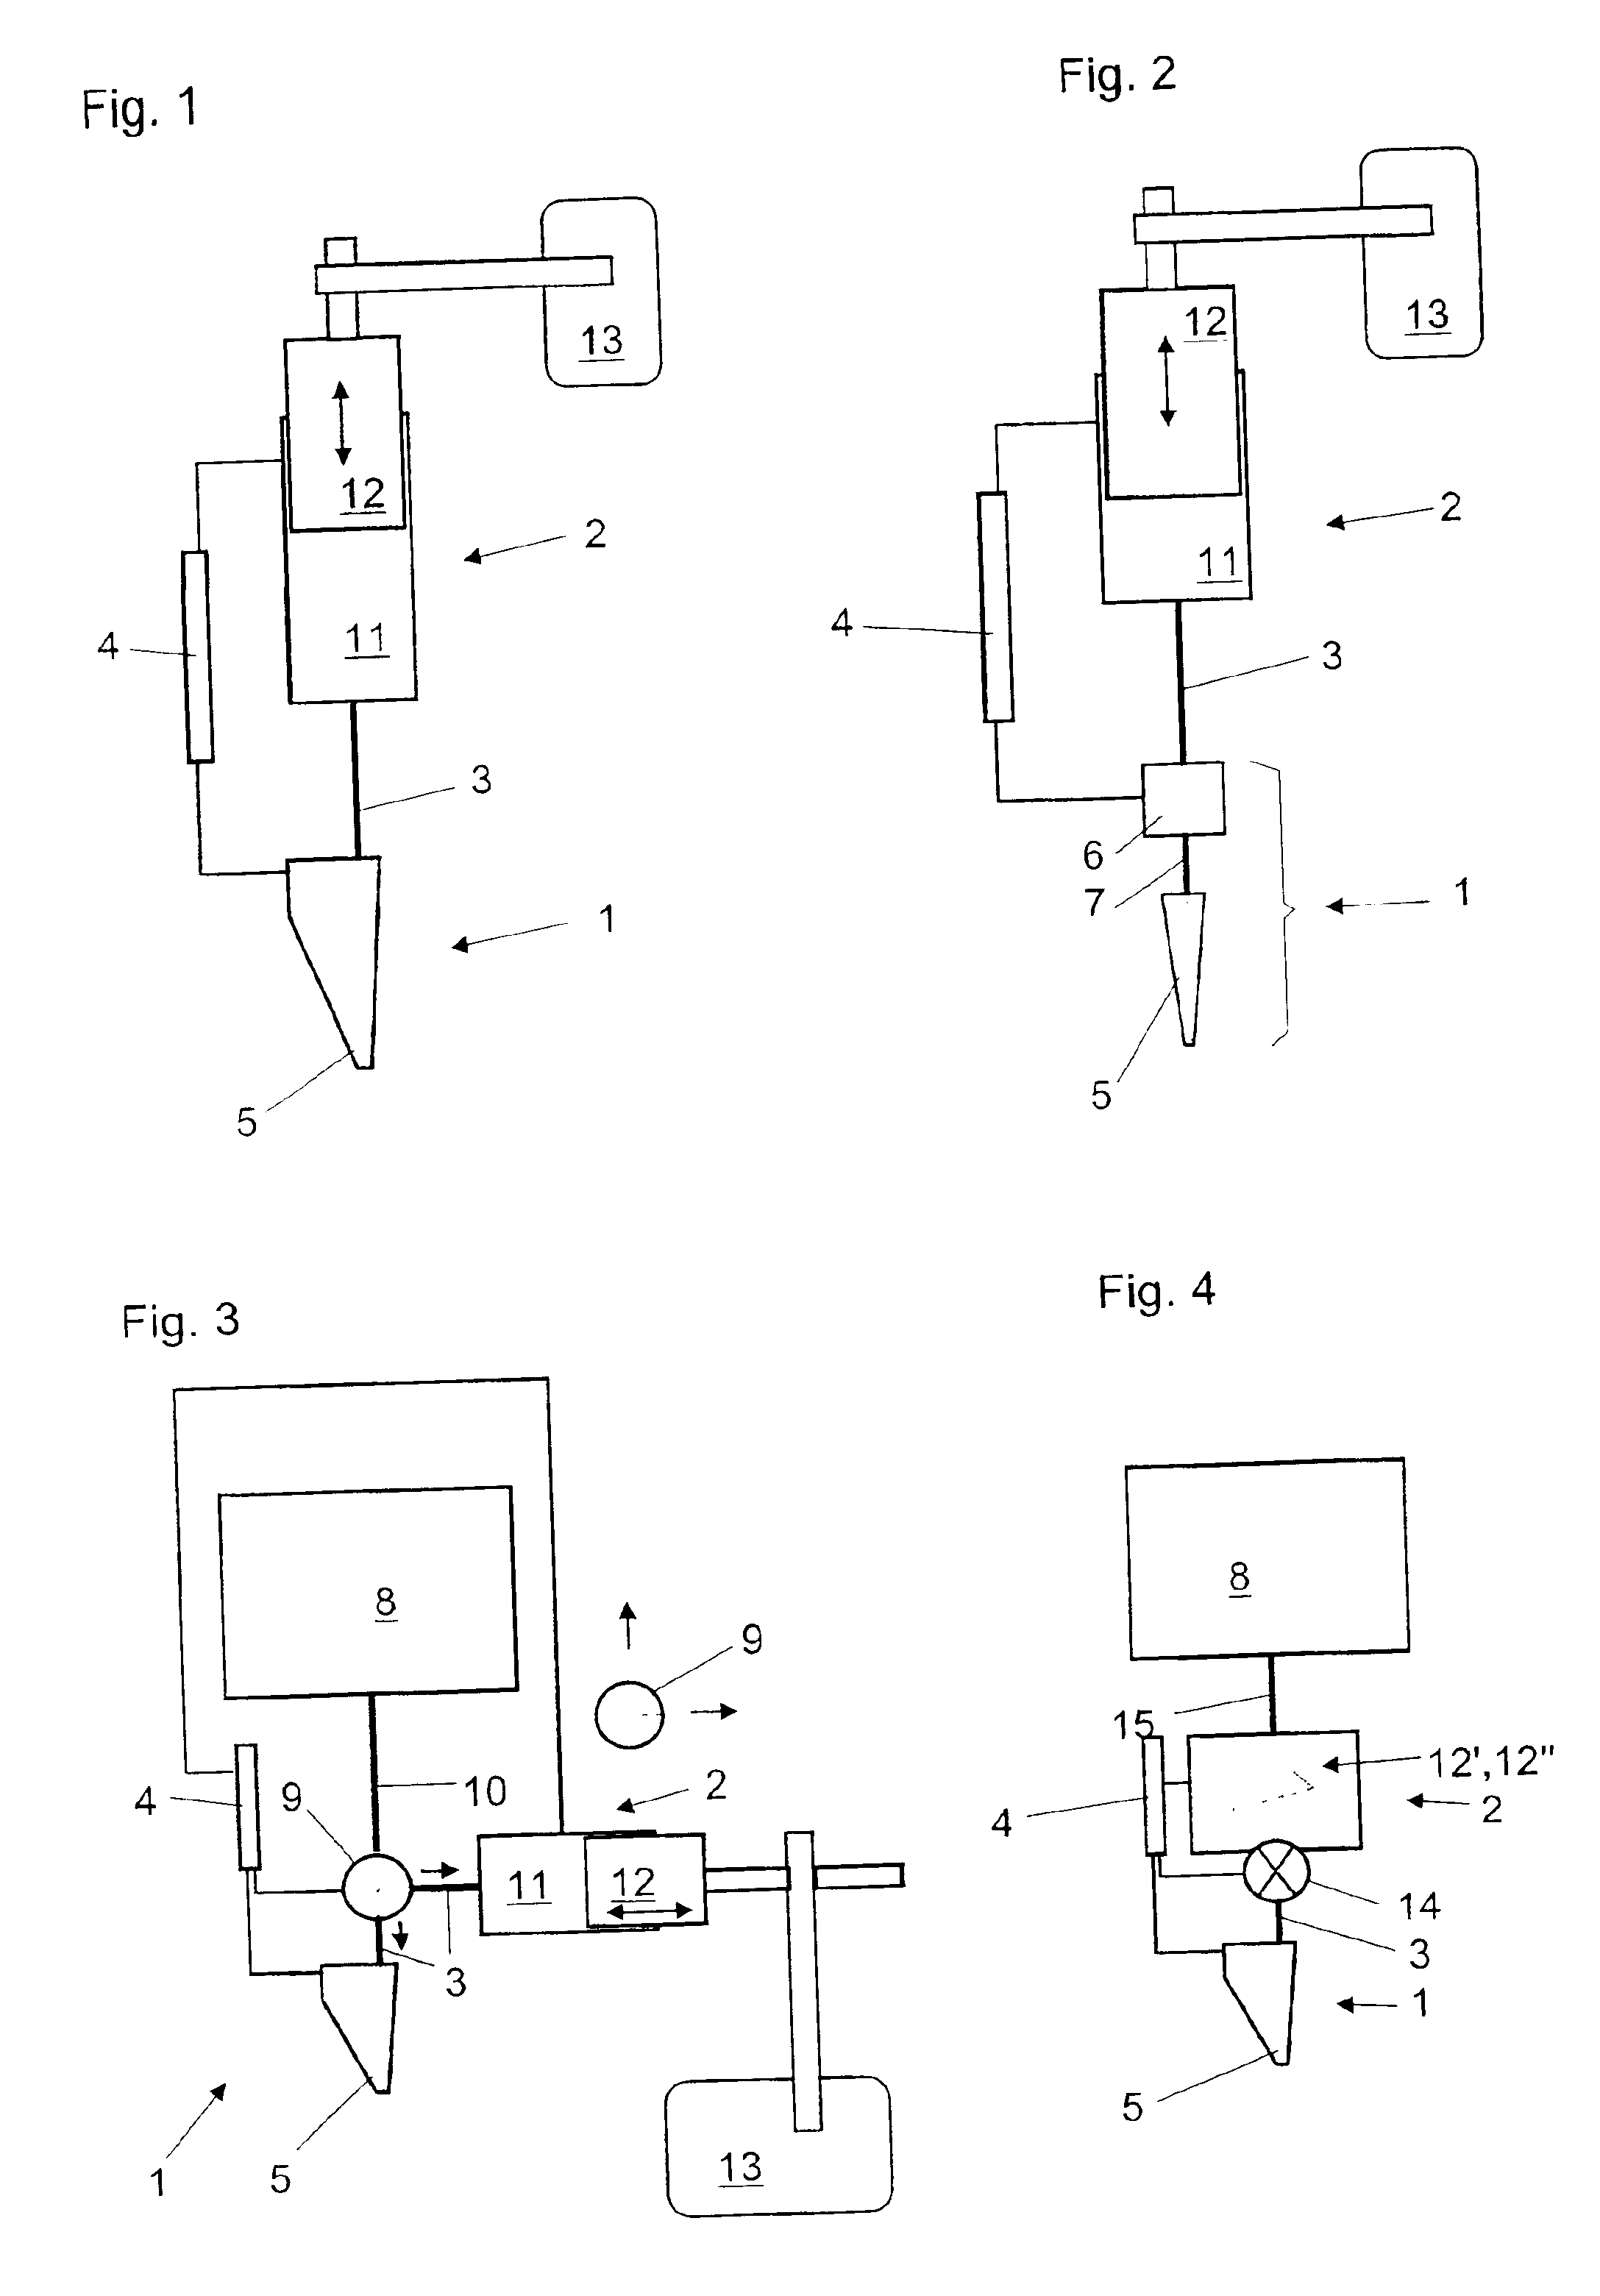 Method and device for separating samples from a liquid